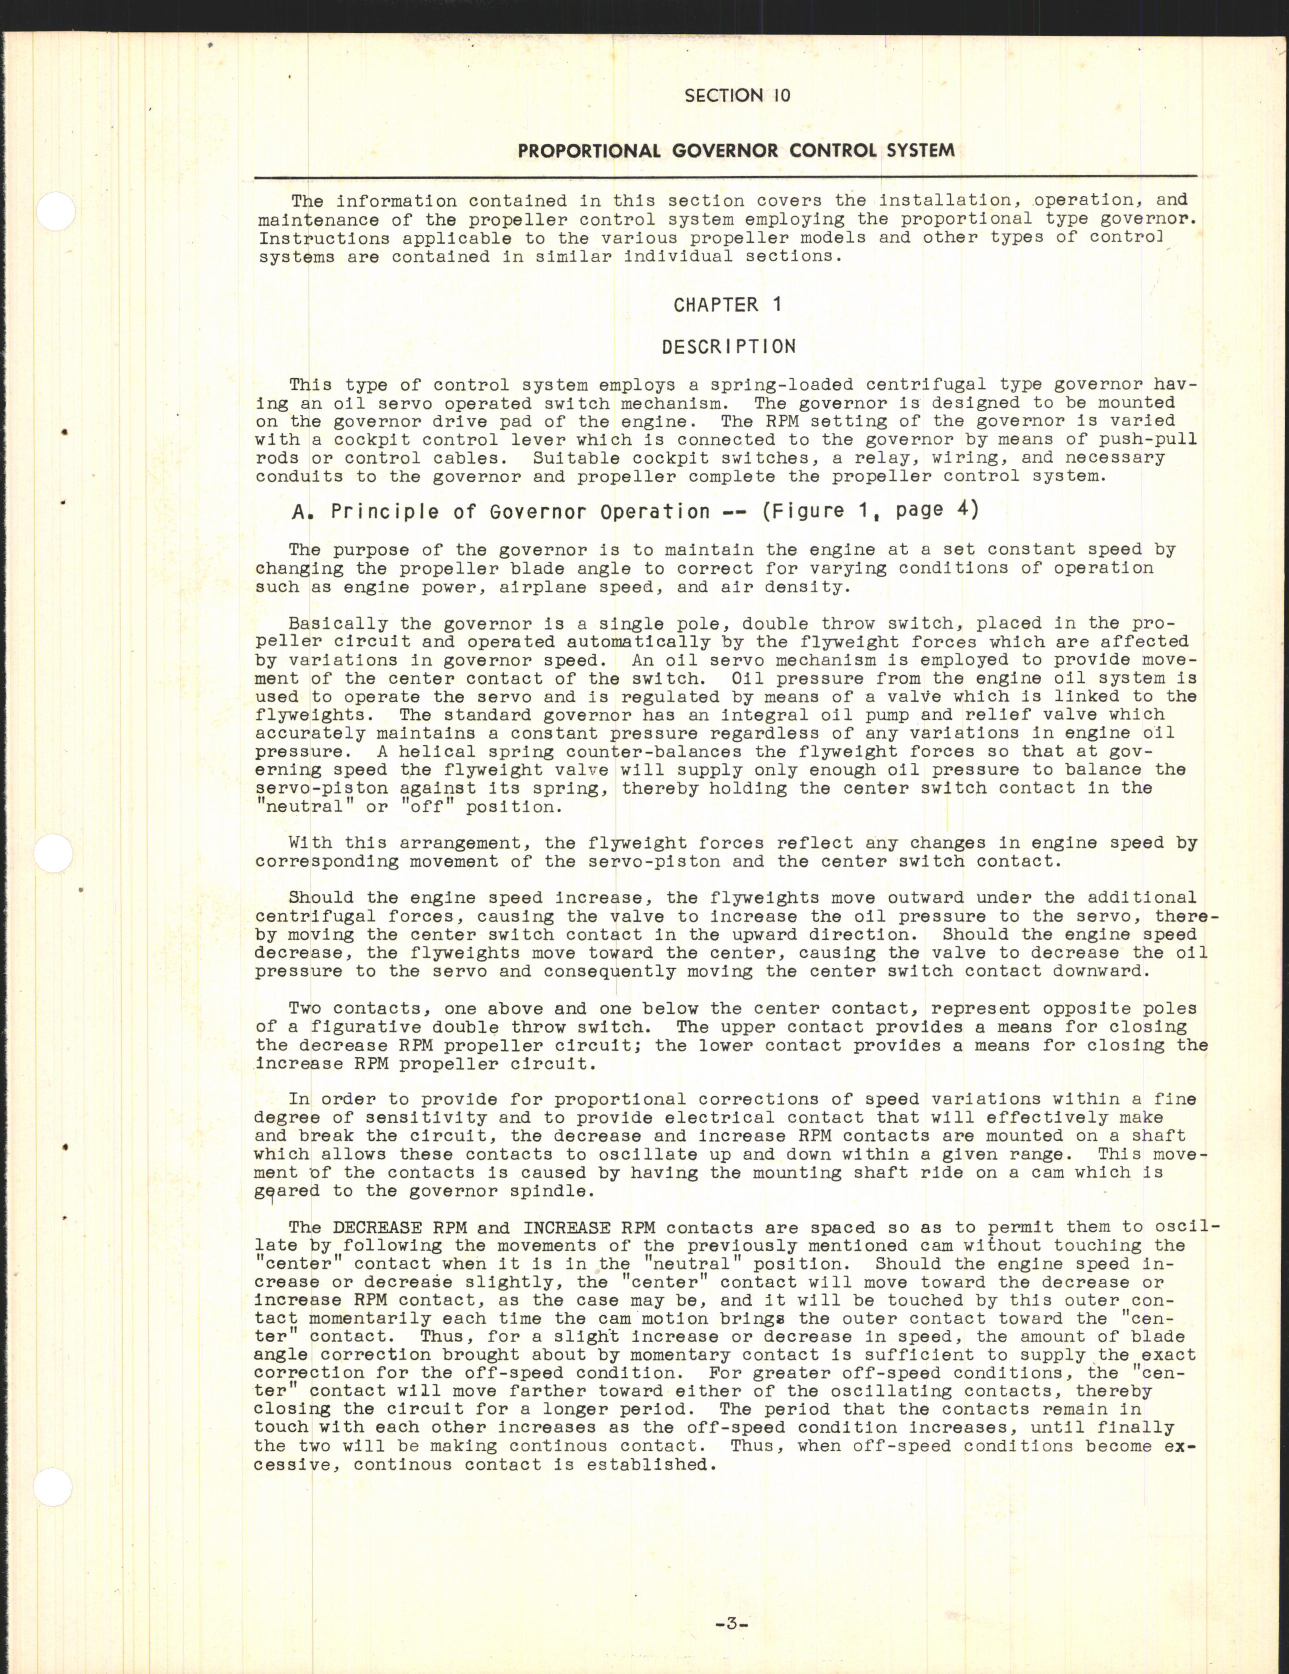 Sample page 5 from AirCorps Library document: Section 10 - Proportional Governor Control System